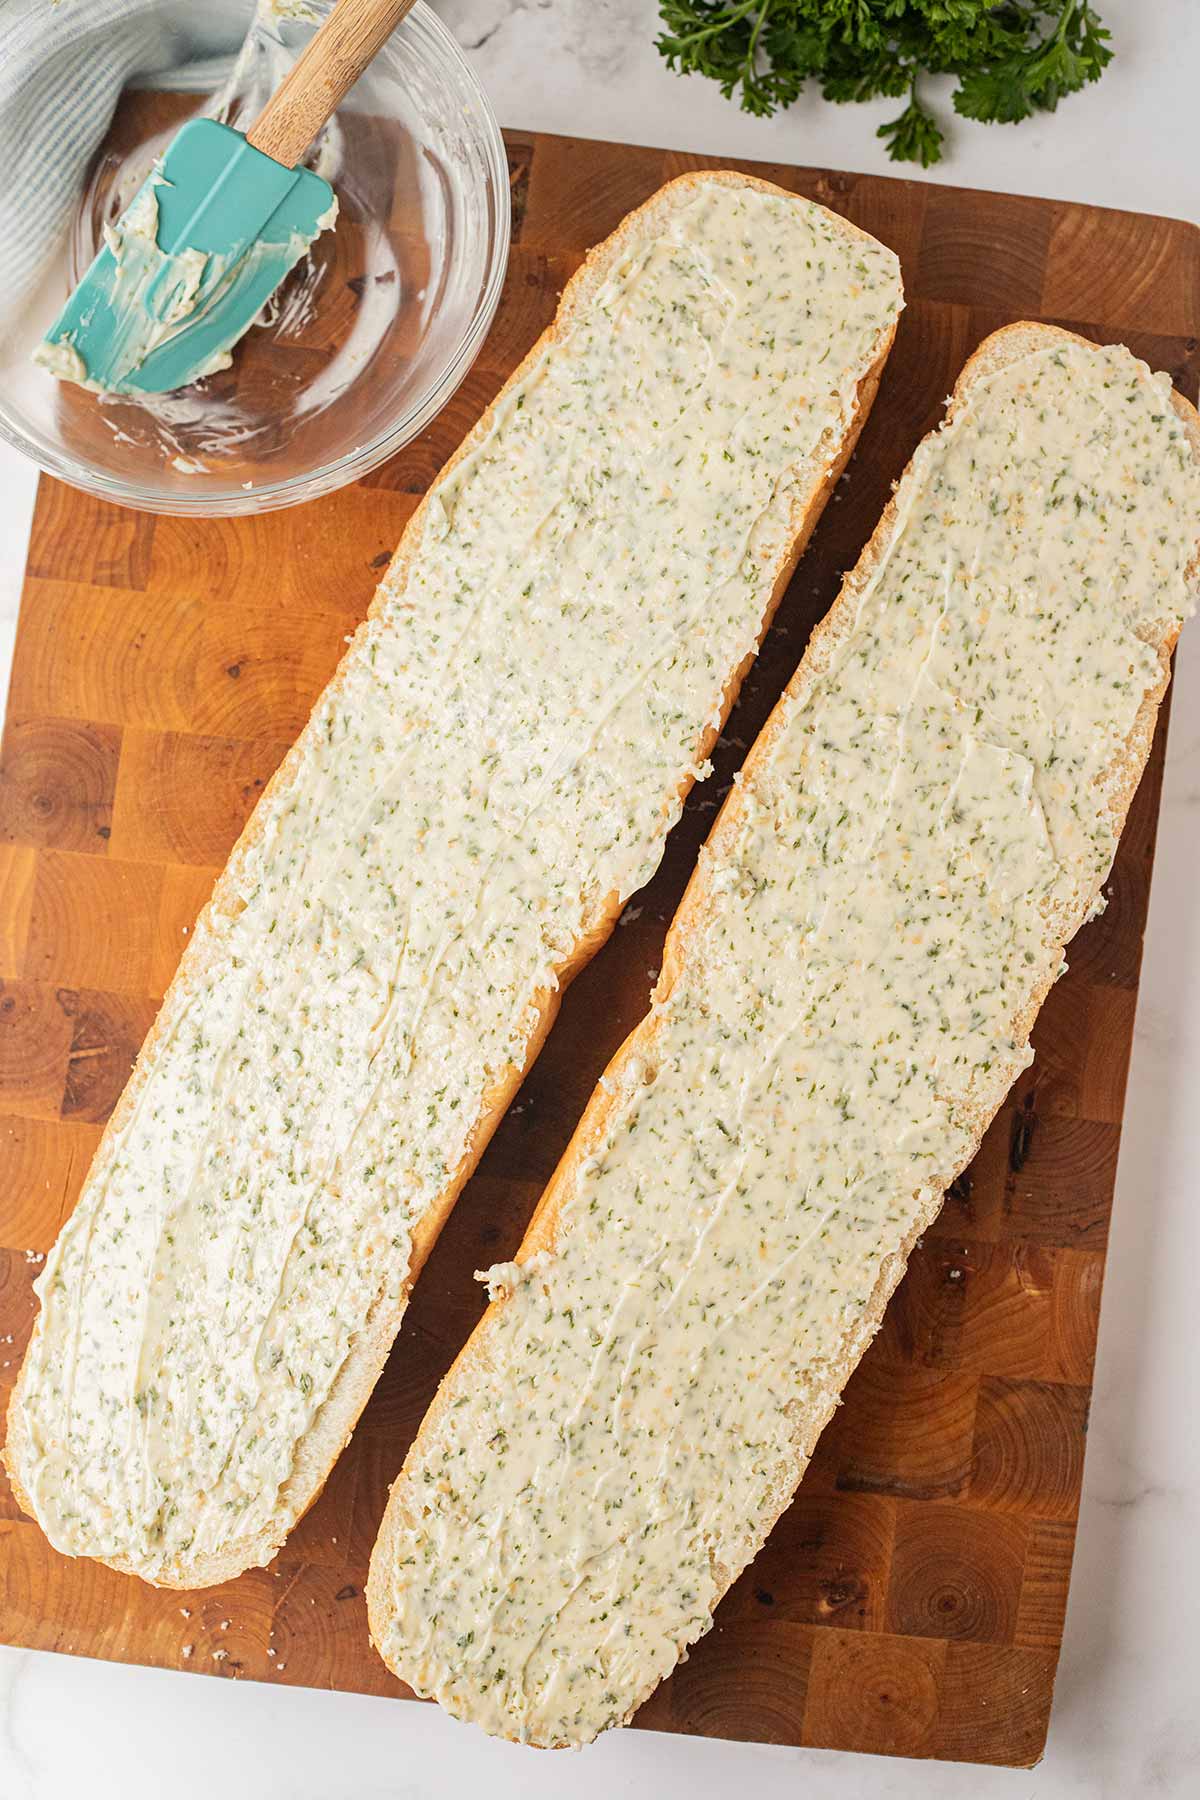 Process shot showing how to spread the garlic butter mixture onto make-ahead freezer garlic bread.